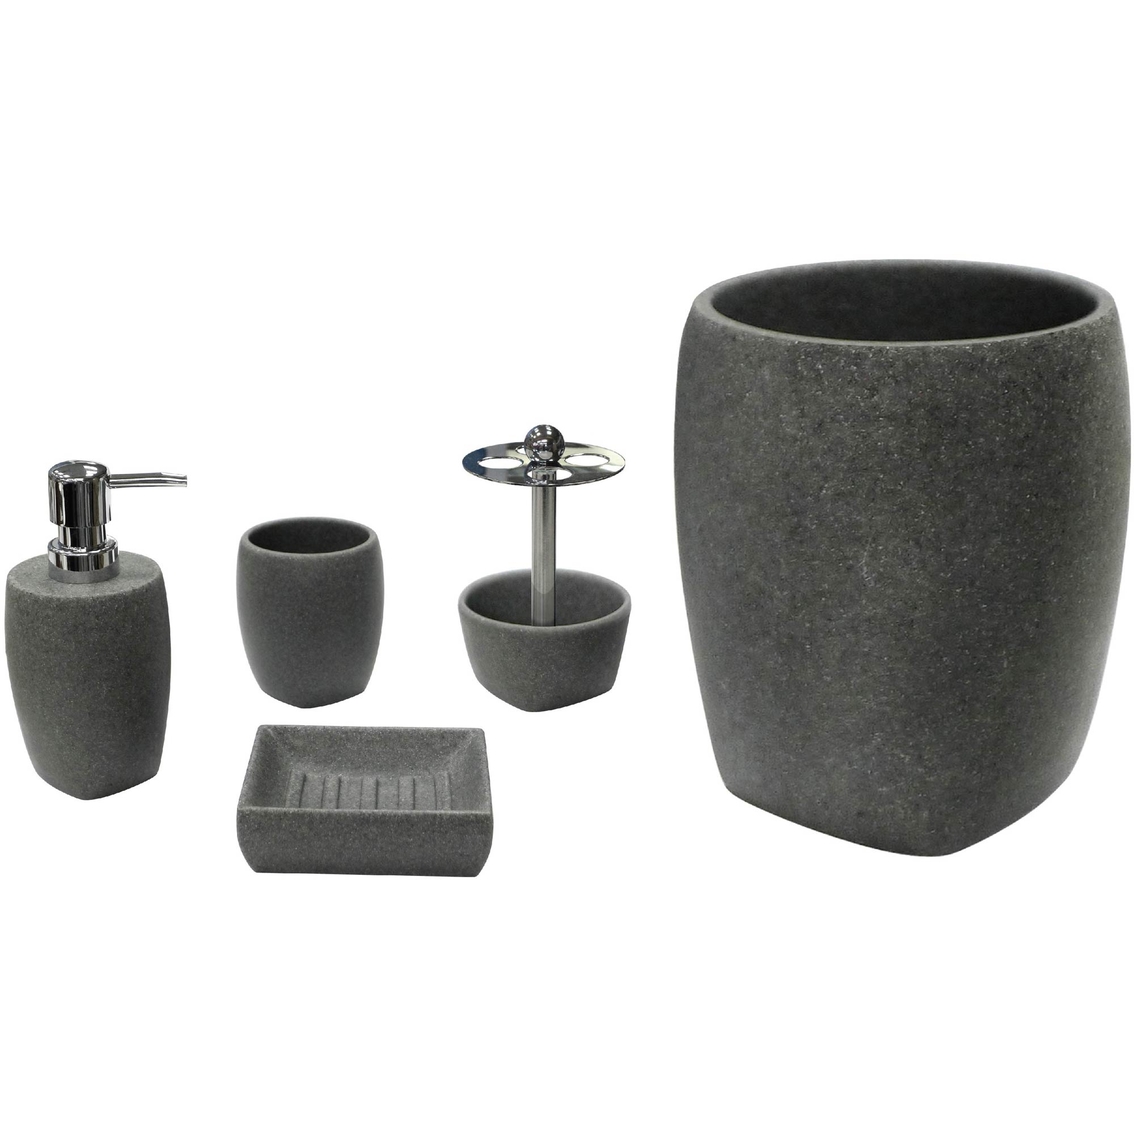 Allure Charcoal Stone Tumbler - Image 3 of 3